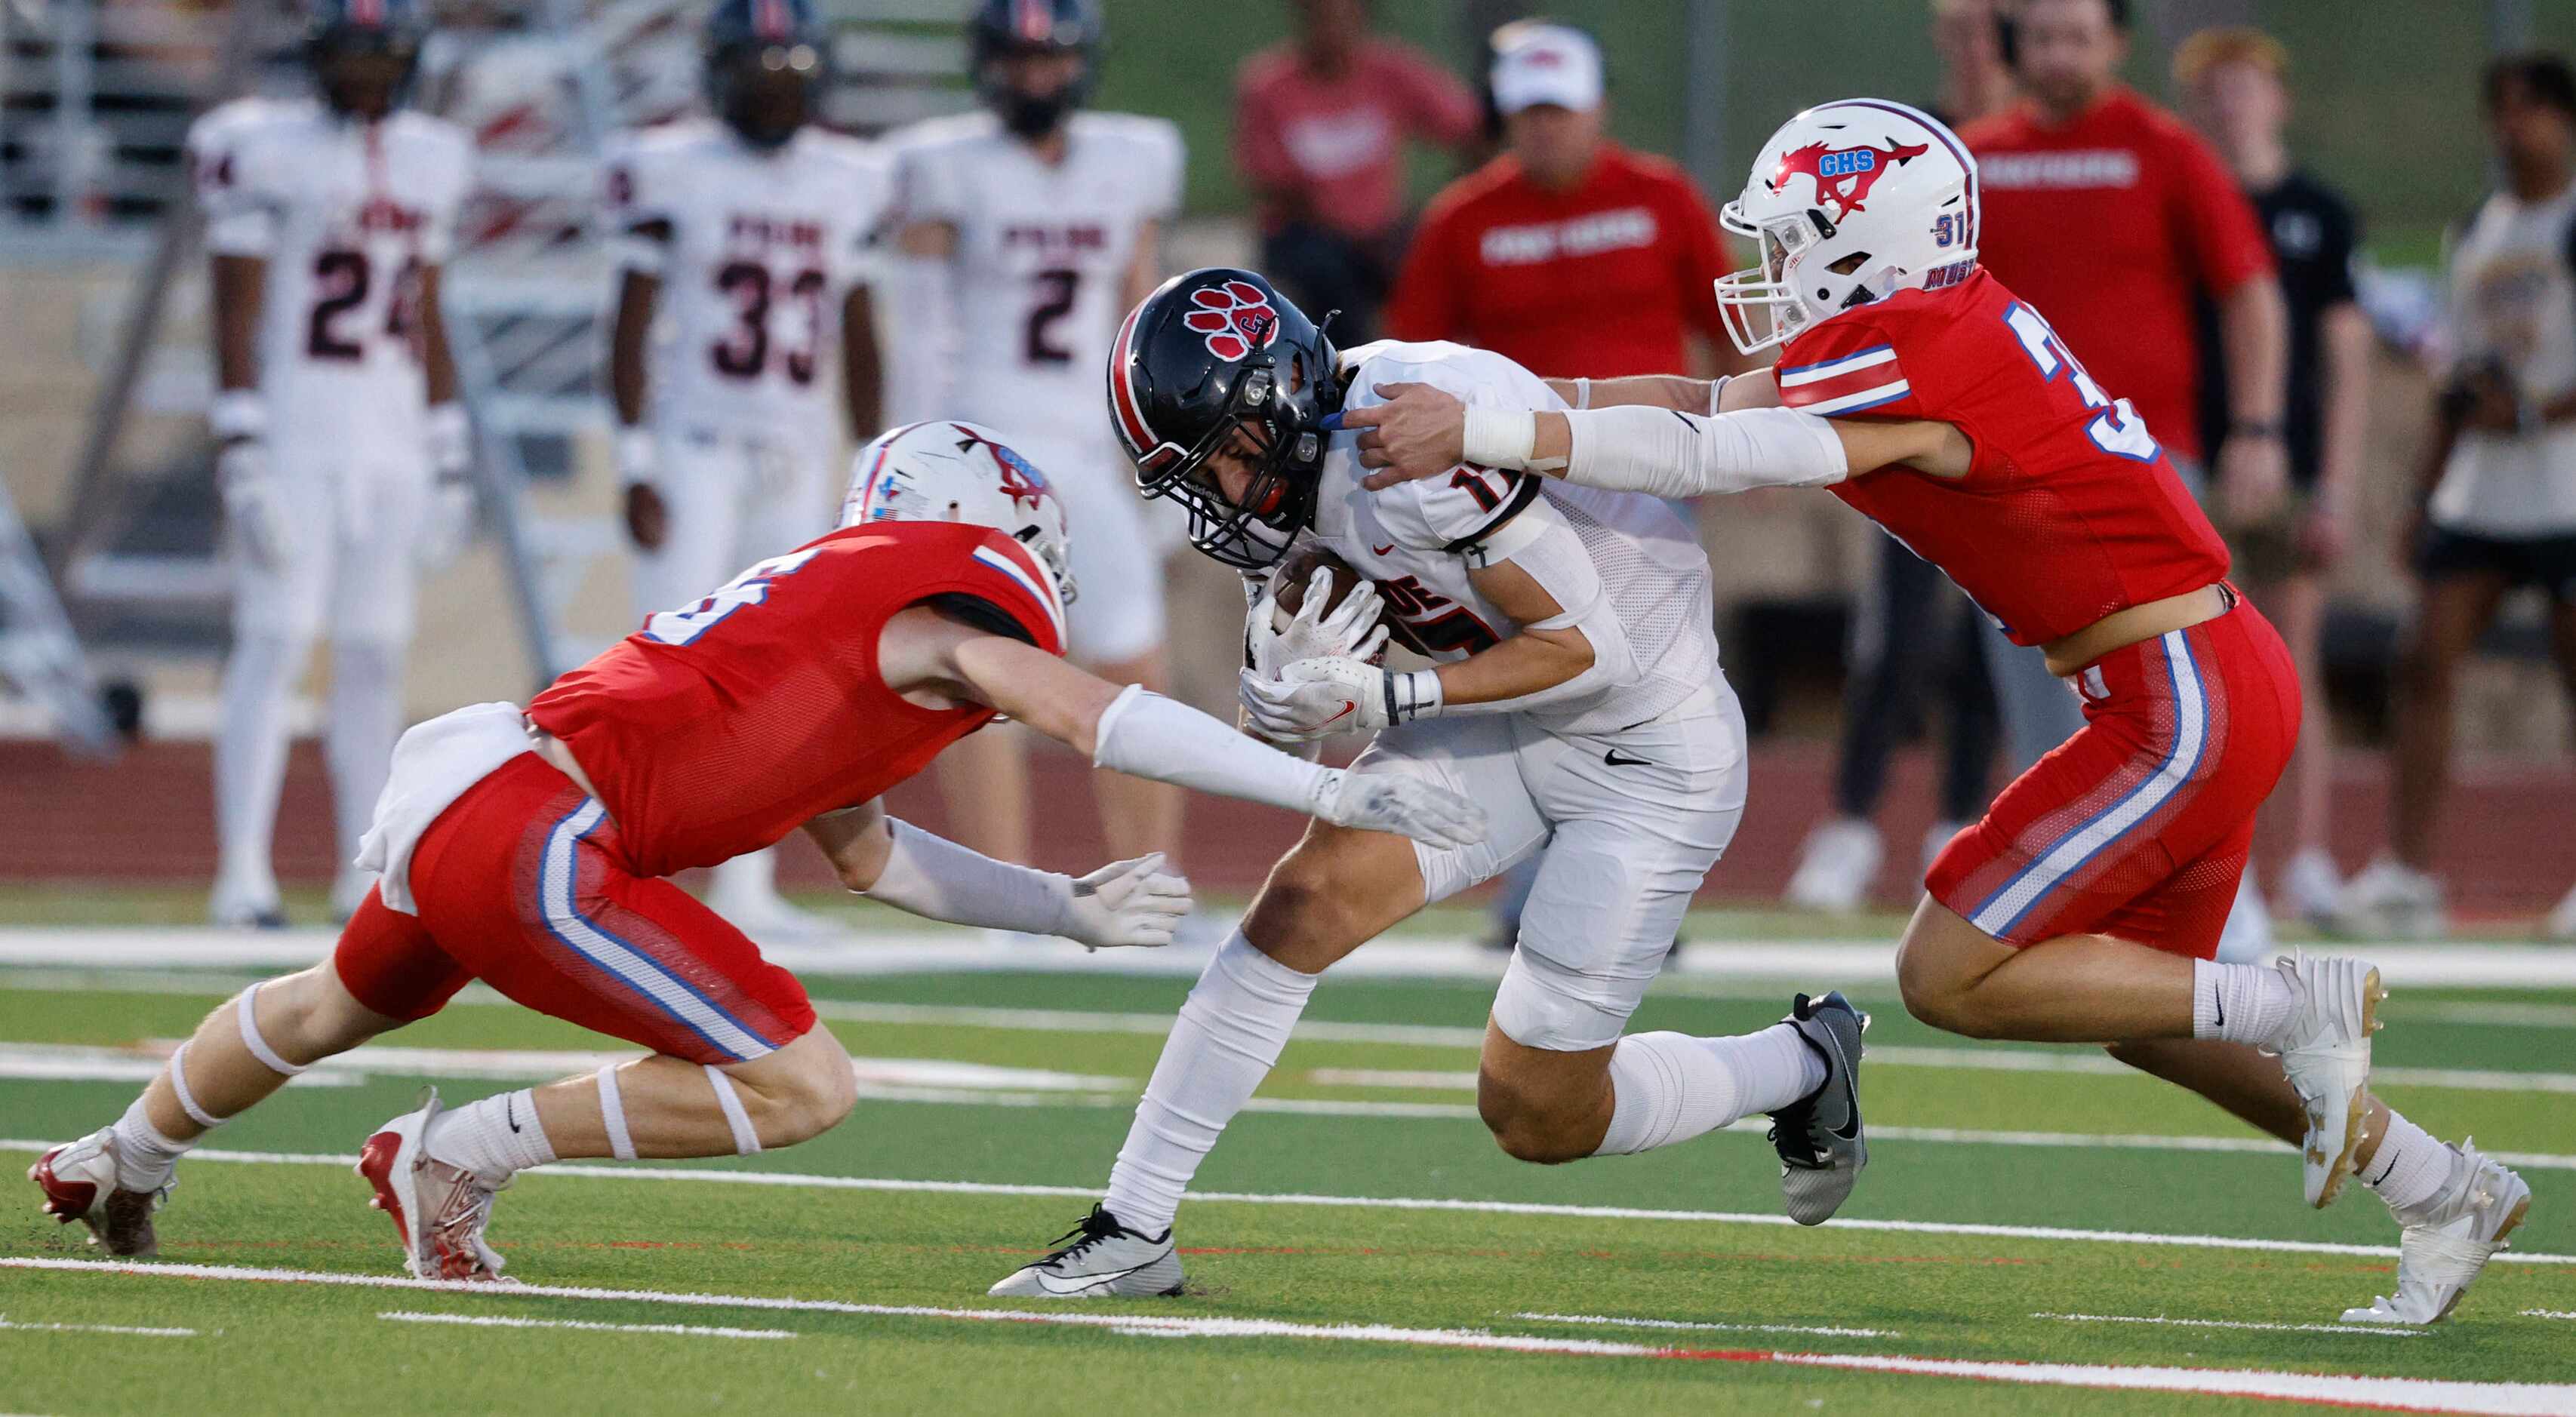 Grapevine's Major Heckt (6) and Grapevine's Cooper Towery (31) go to stop Colleyville...